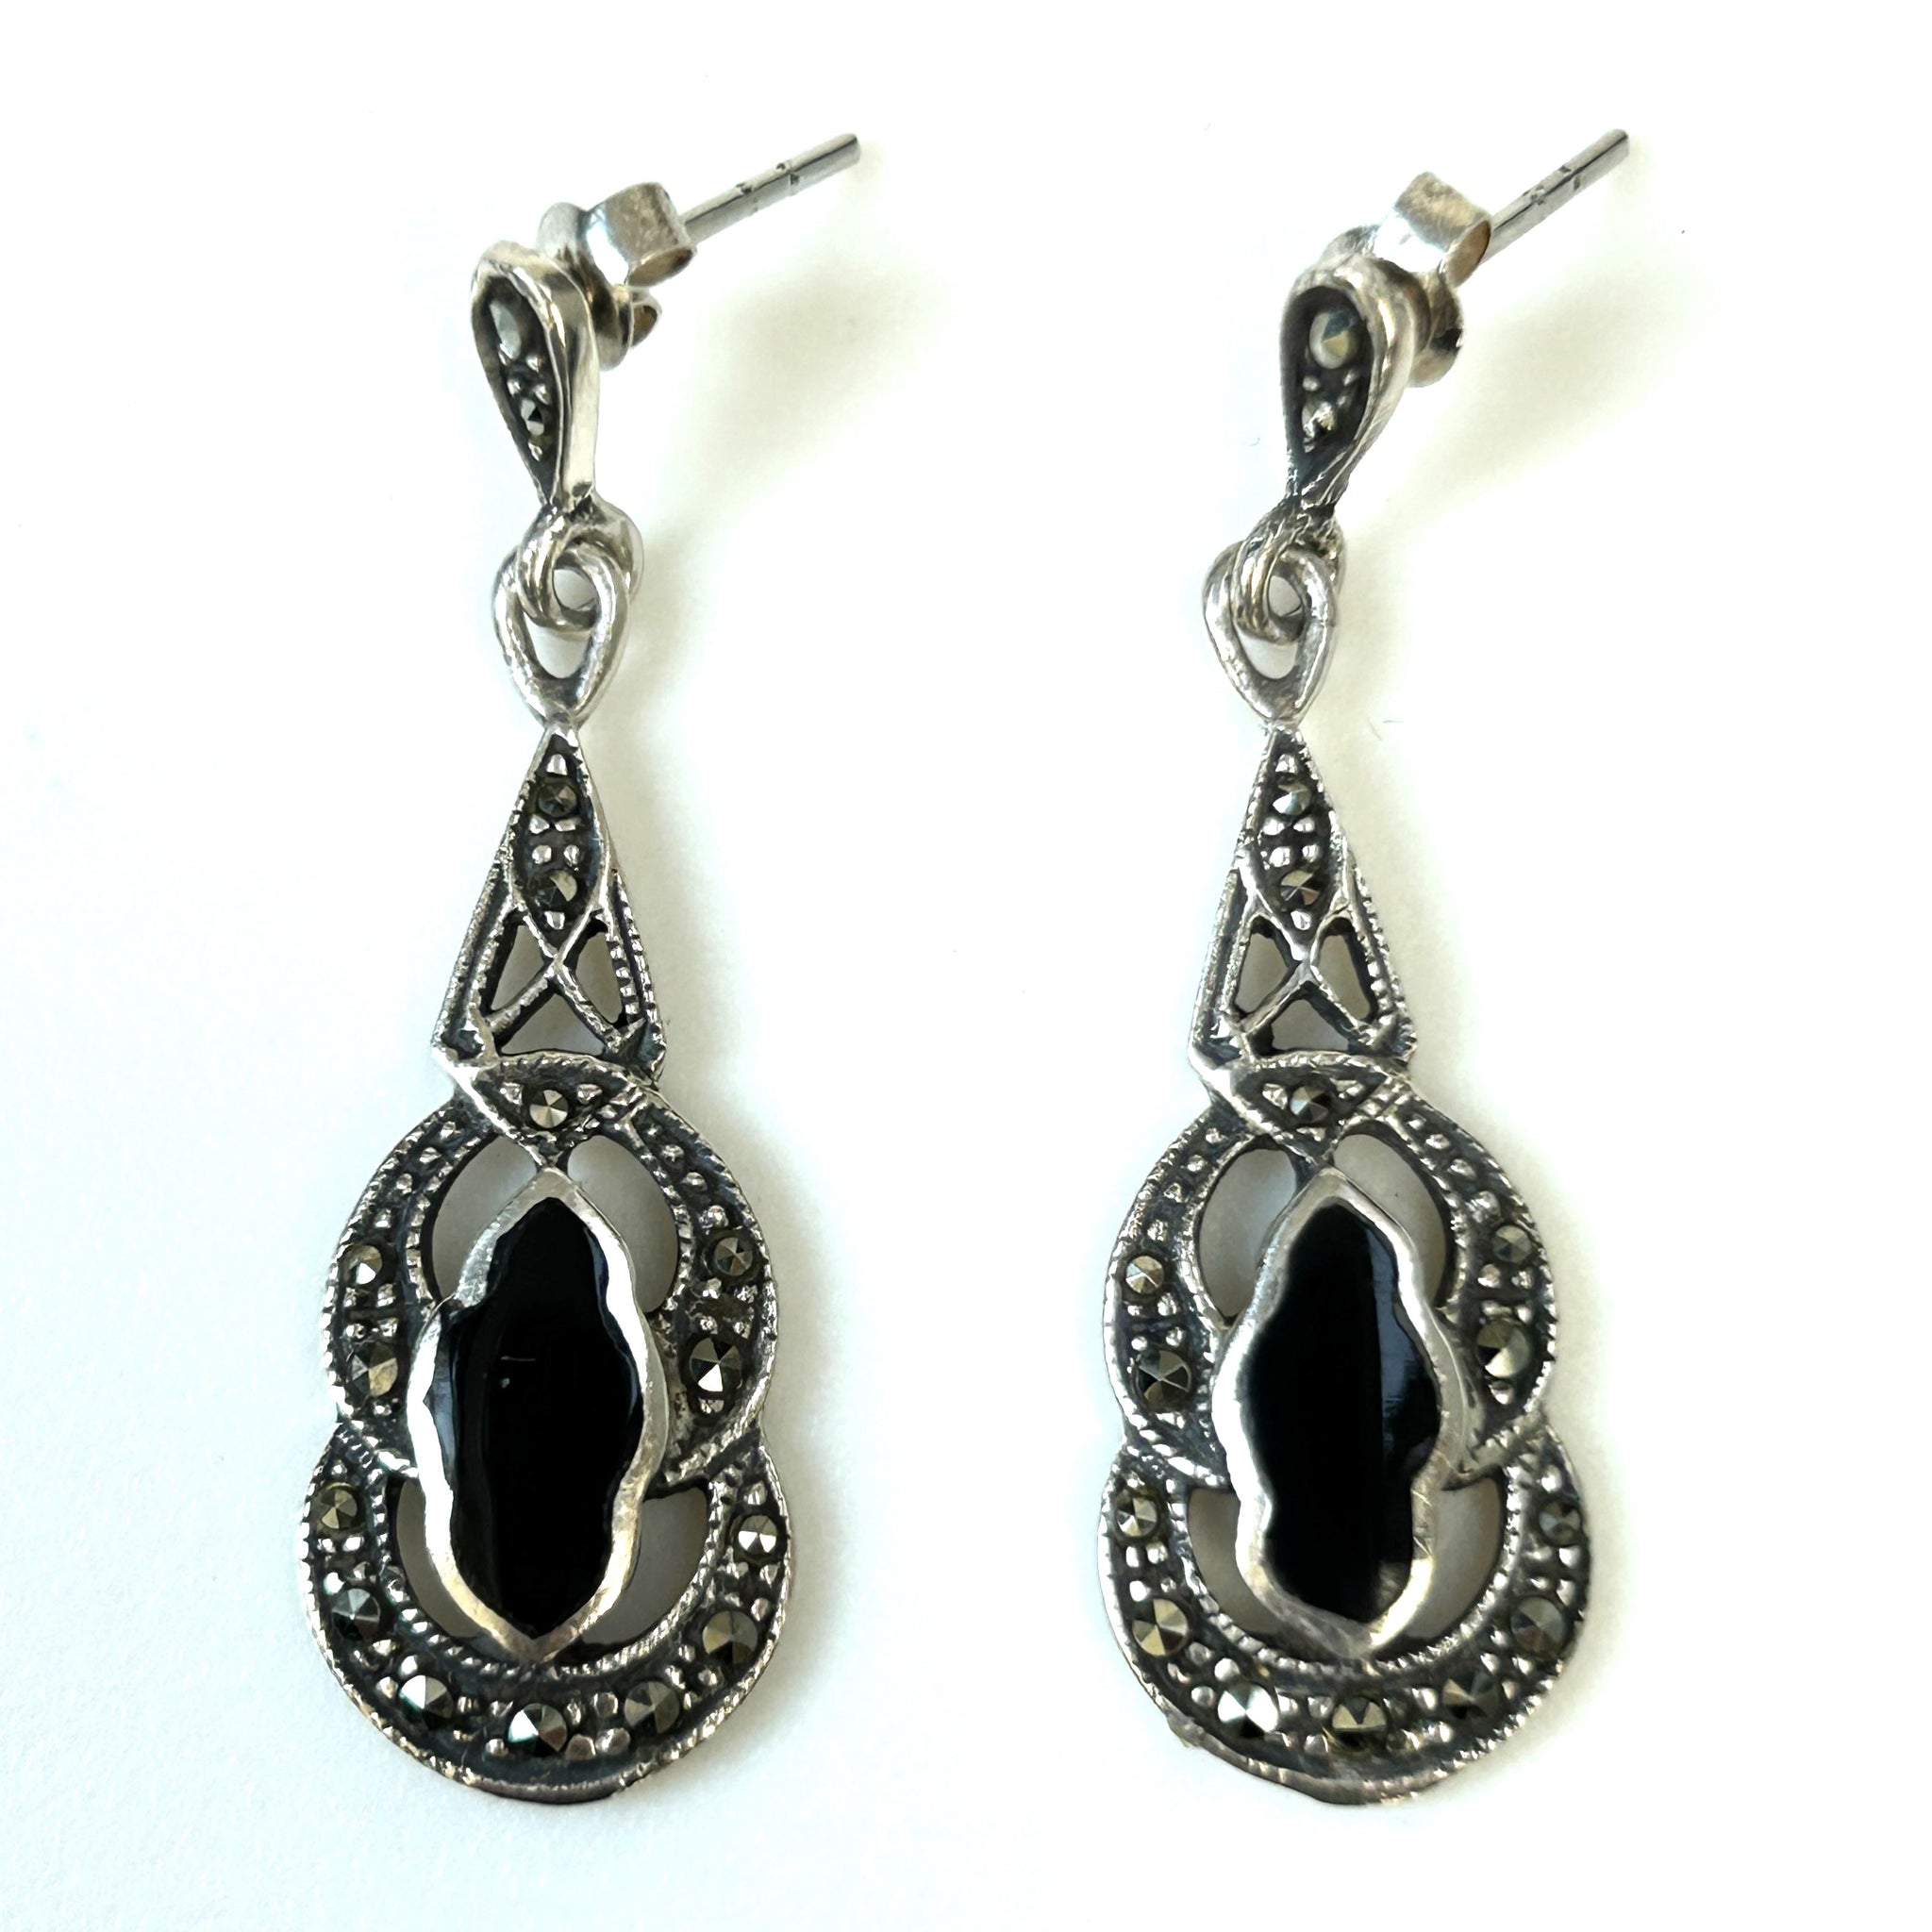 Sterling Silver, Onyx and Marcasite Earrings